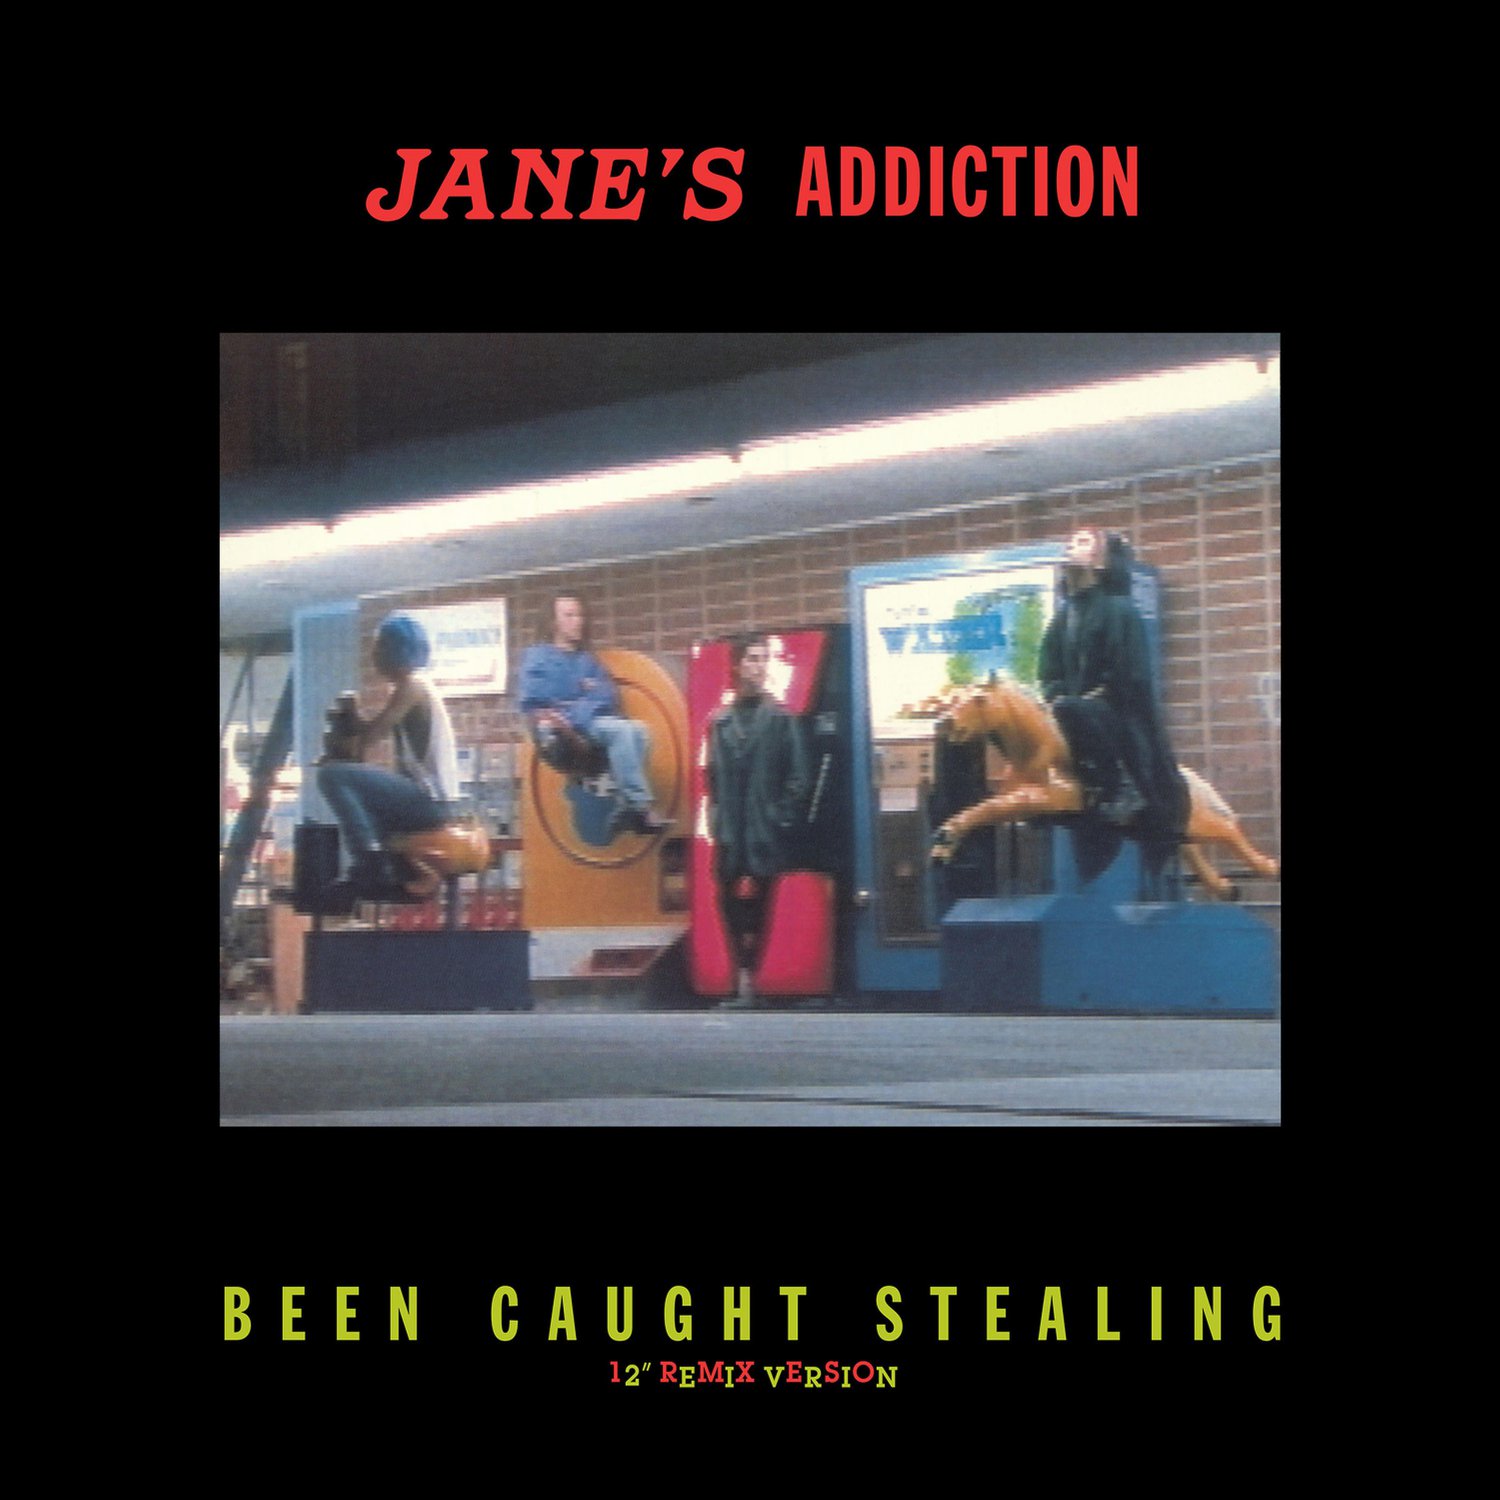 JANE'S ADDICTION  Been Caught Stealing BANNER Huge 4X4 Ft Fabric Poster Tapestry Flag album cover